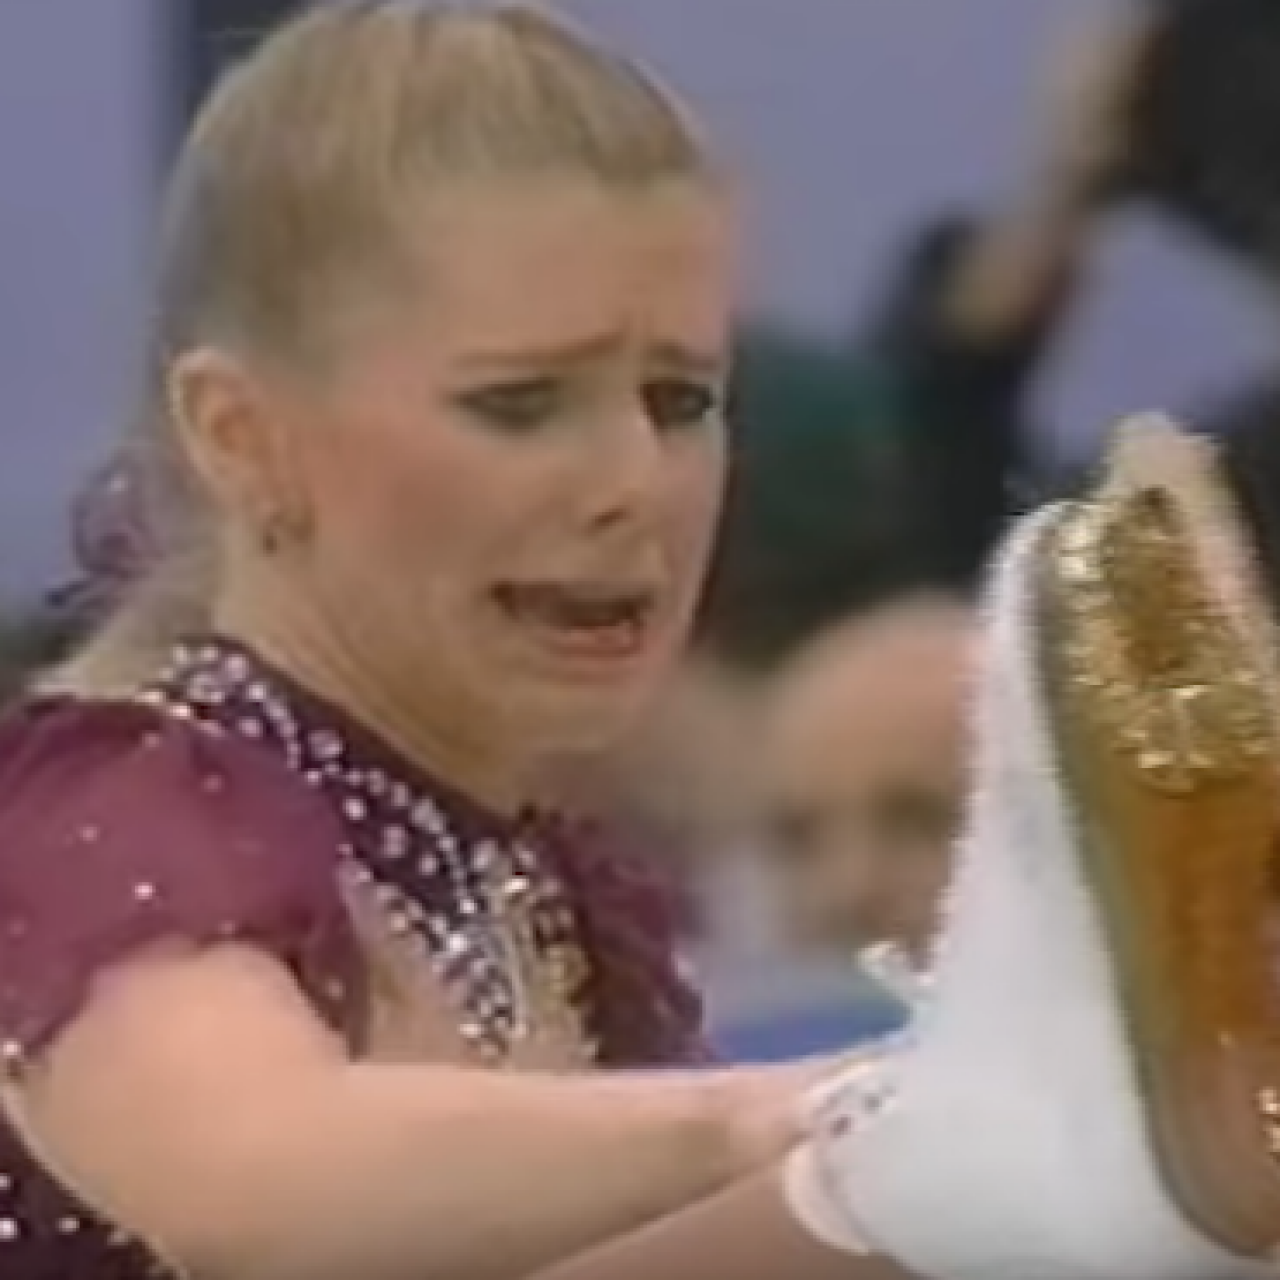 5 Other Bizarre Things Done by Tonya Harding Bad Behavior Investigation Discovery